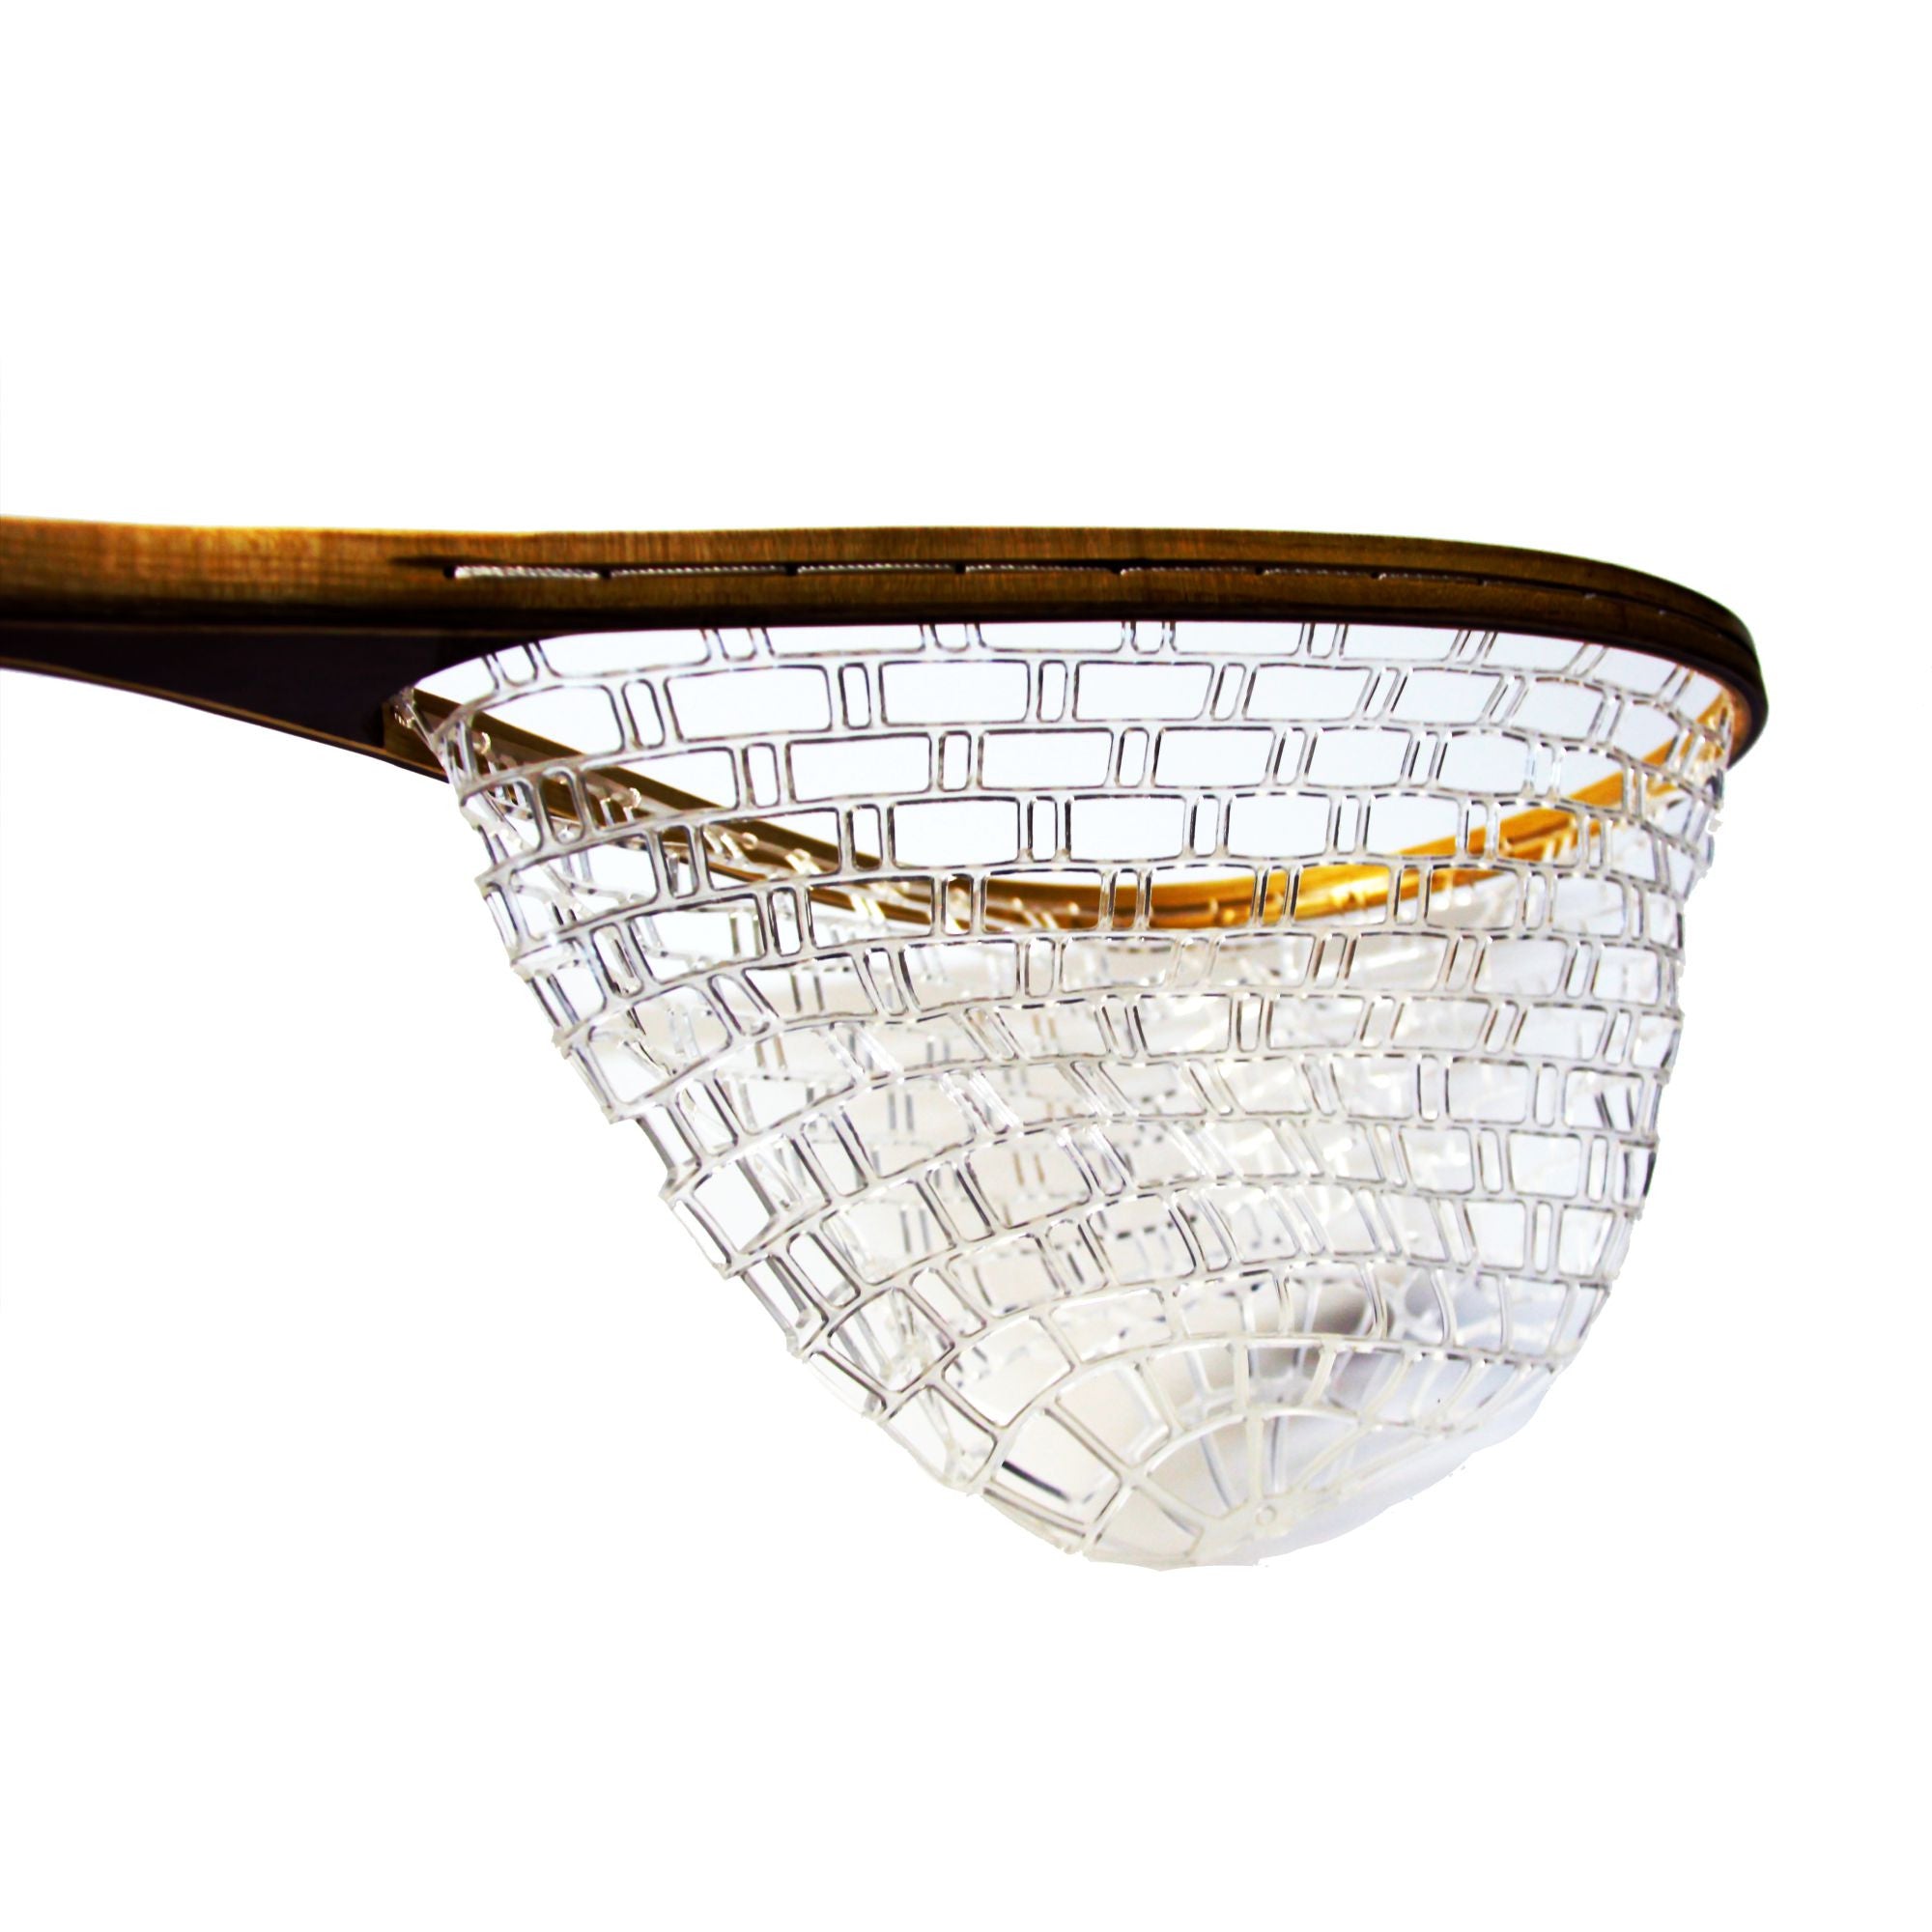 River Grip Fly Fishing Landing Net with Magnetic Release